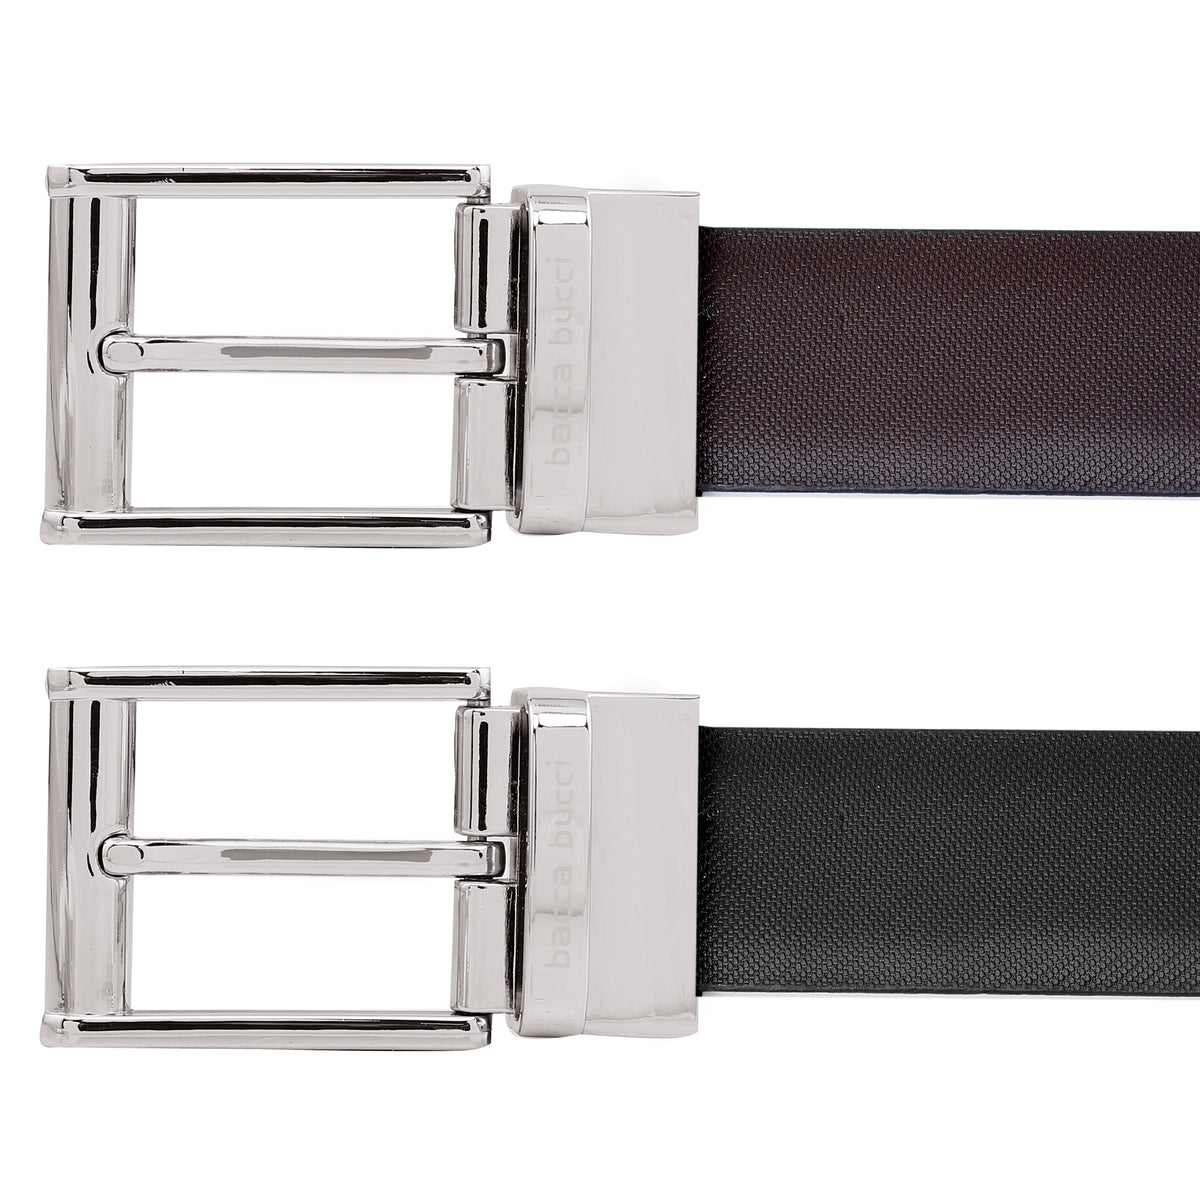 Bacca Bucci 35 MM Nickle Free Reversible-Clamp Belt-Buckle with Branding (Buckle only)